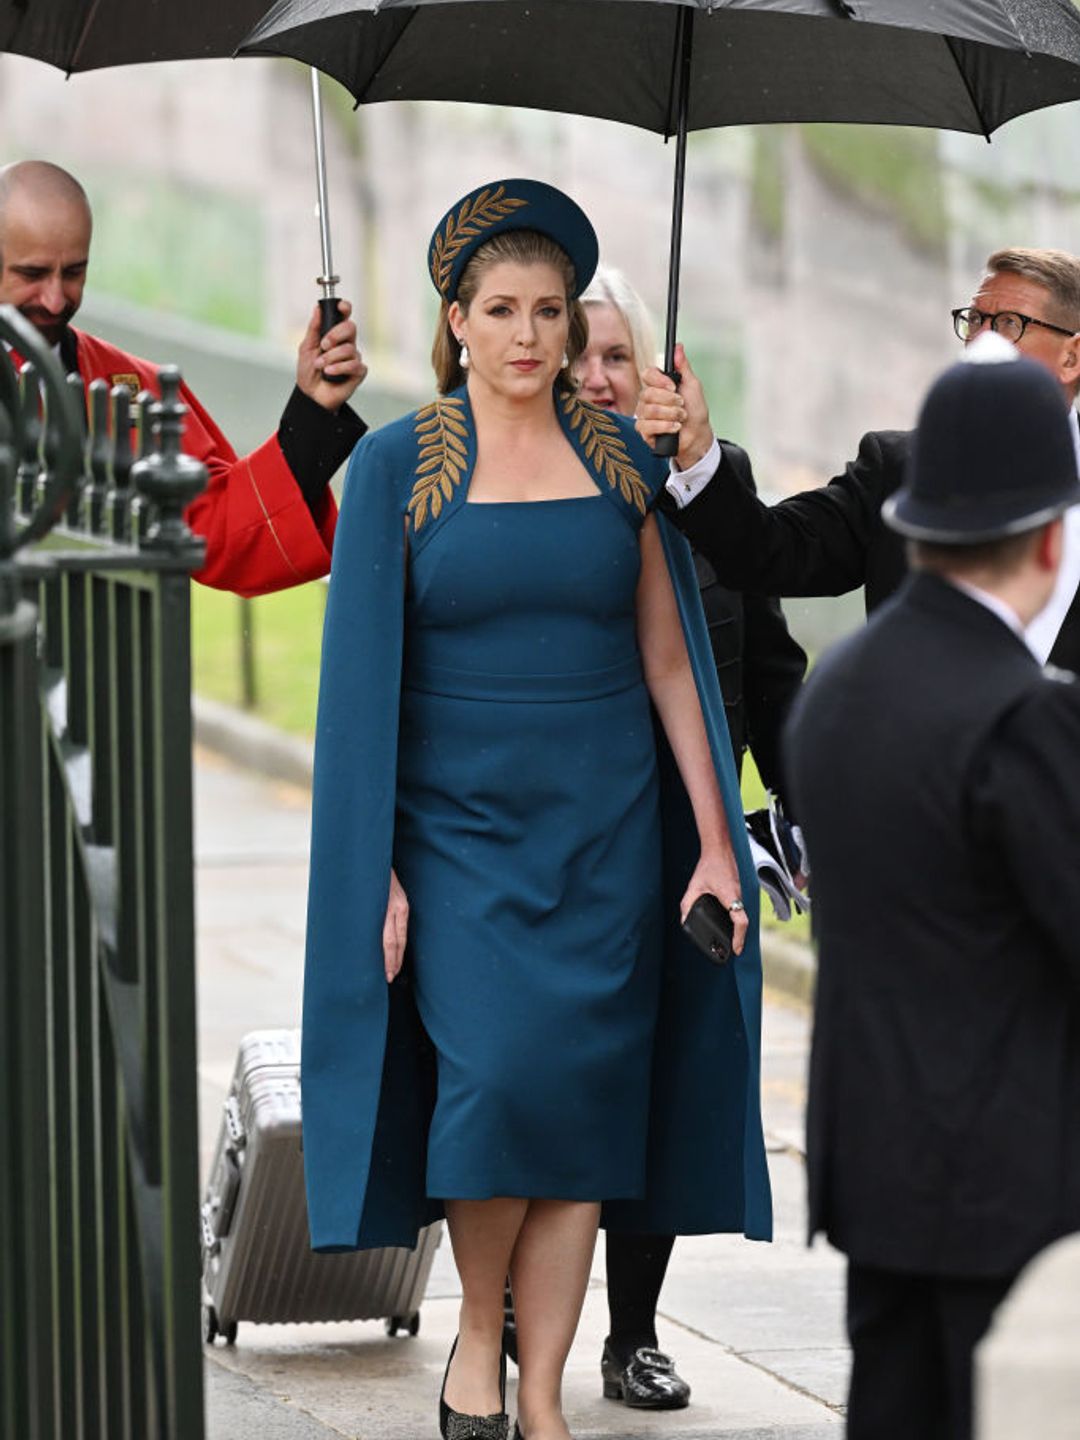 Penny wearing a teal cape dress embroidered with the golden fern motif of the Privy Council